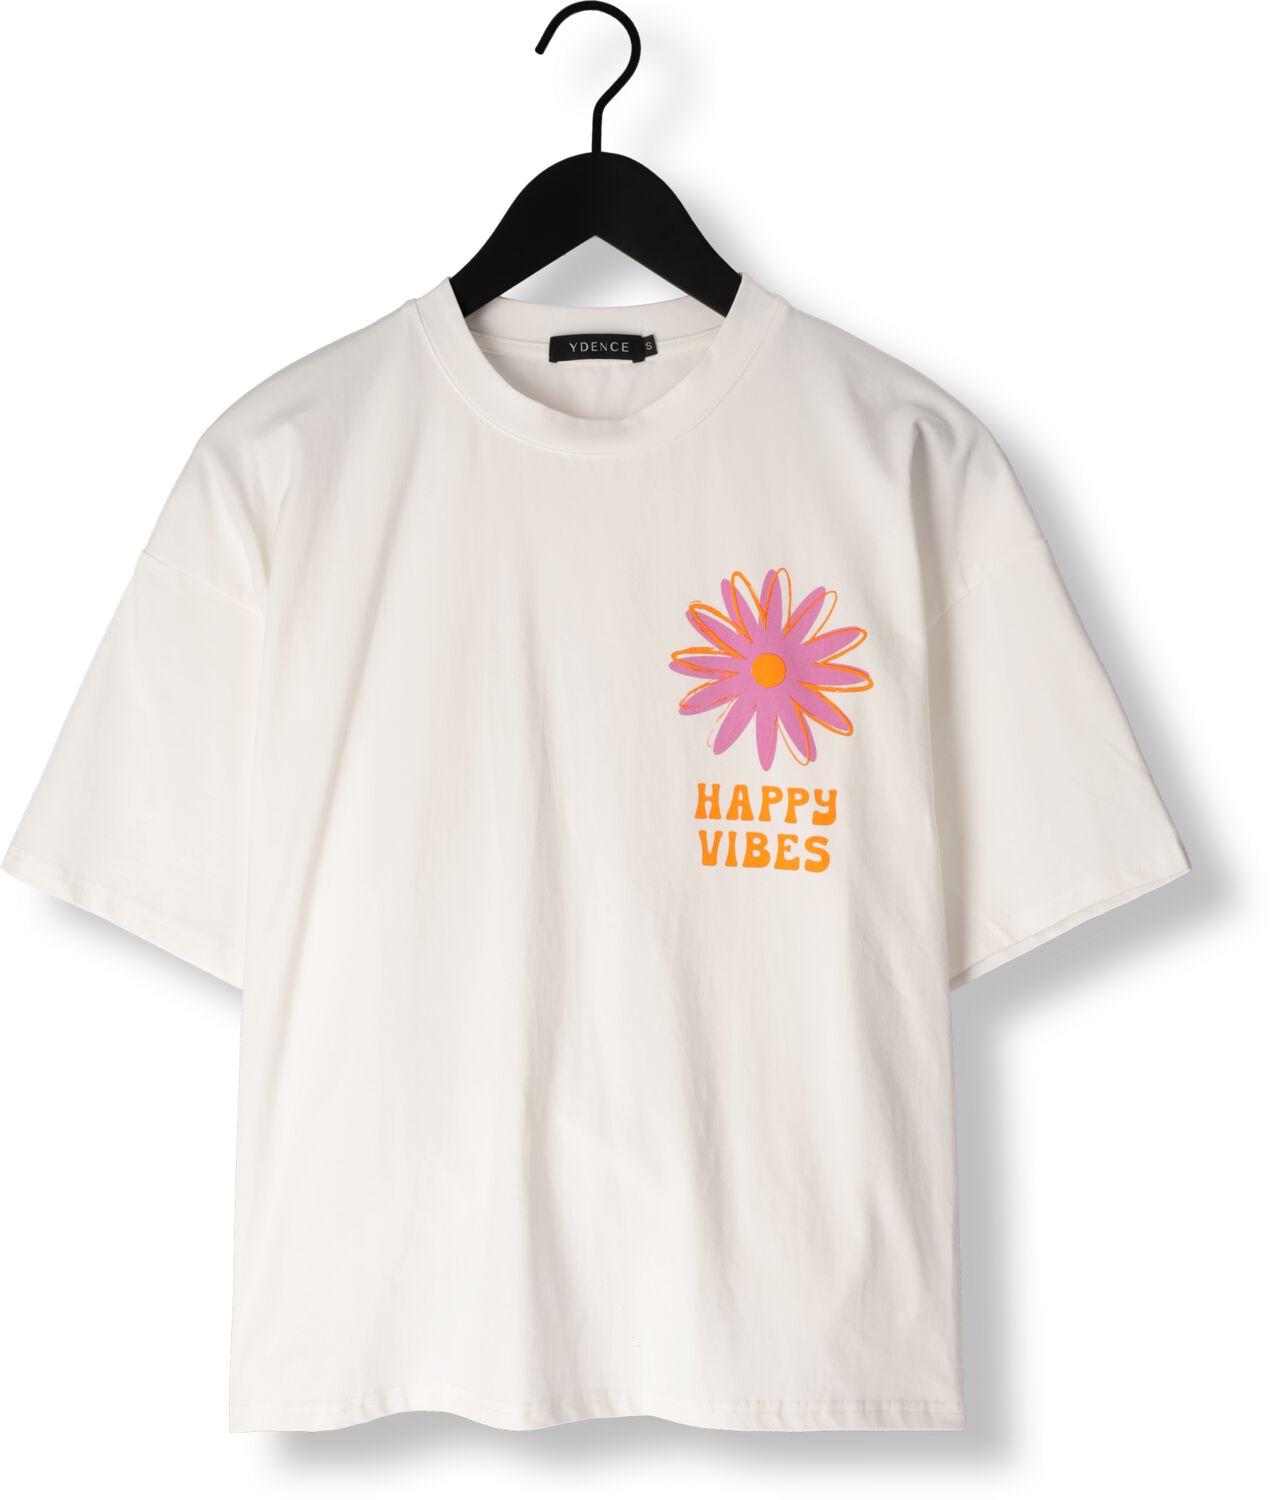 YDENCE Dames Tops & T-shirts T-shirt Happy Vibes Gebroken Wit